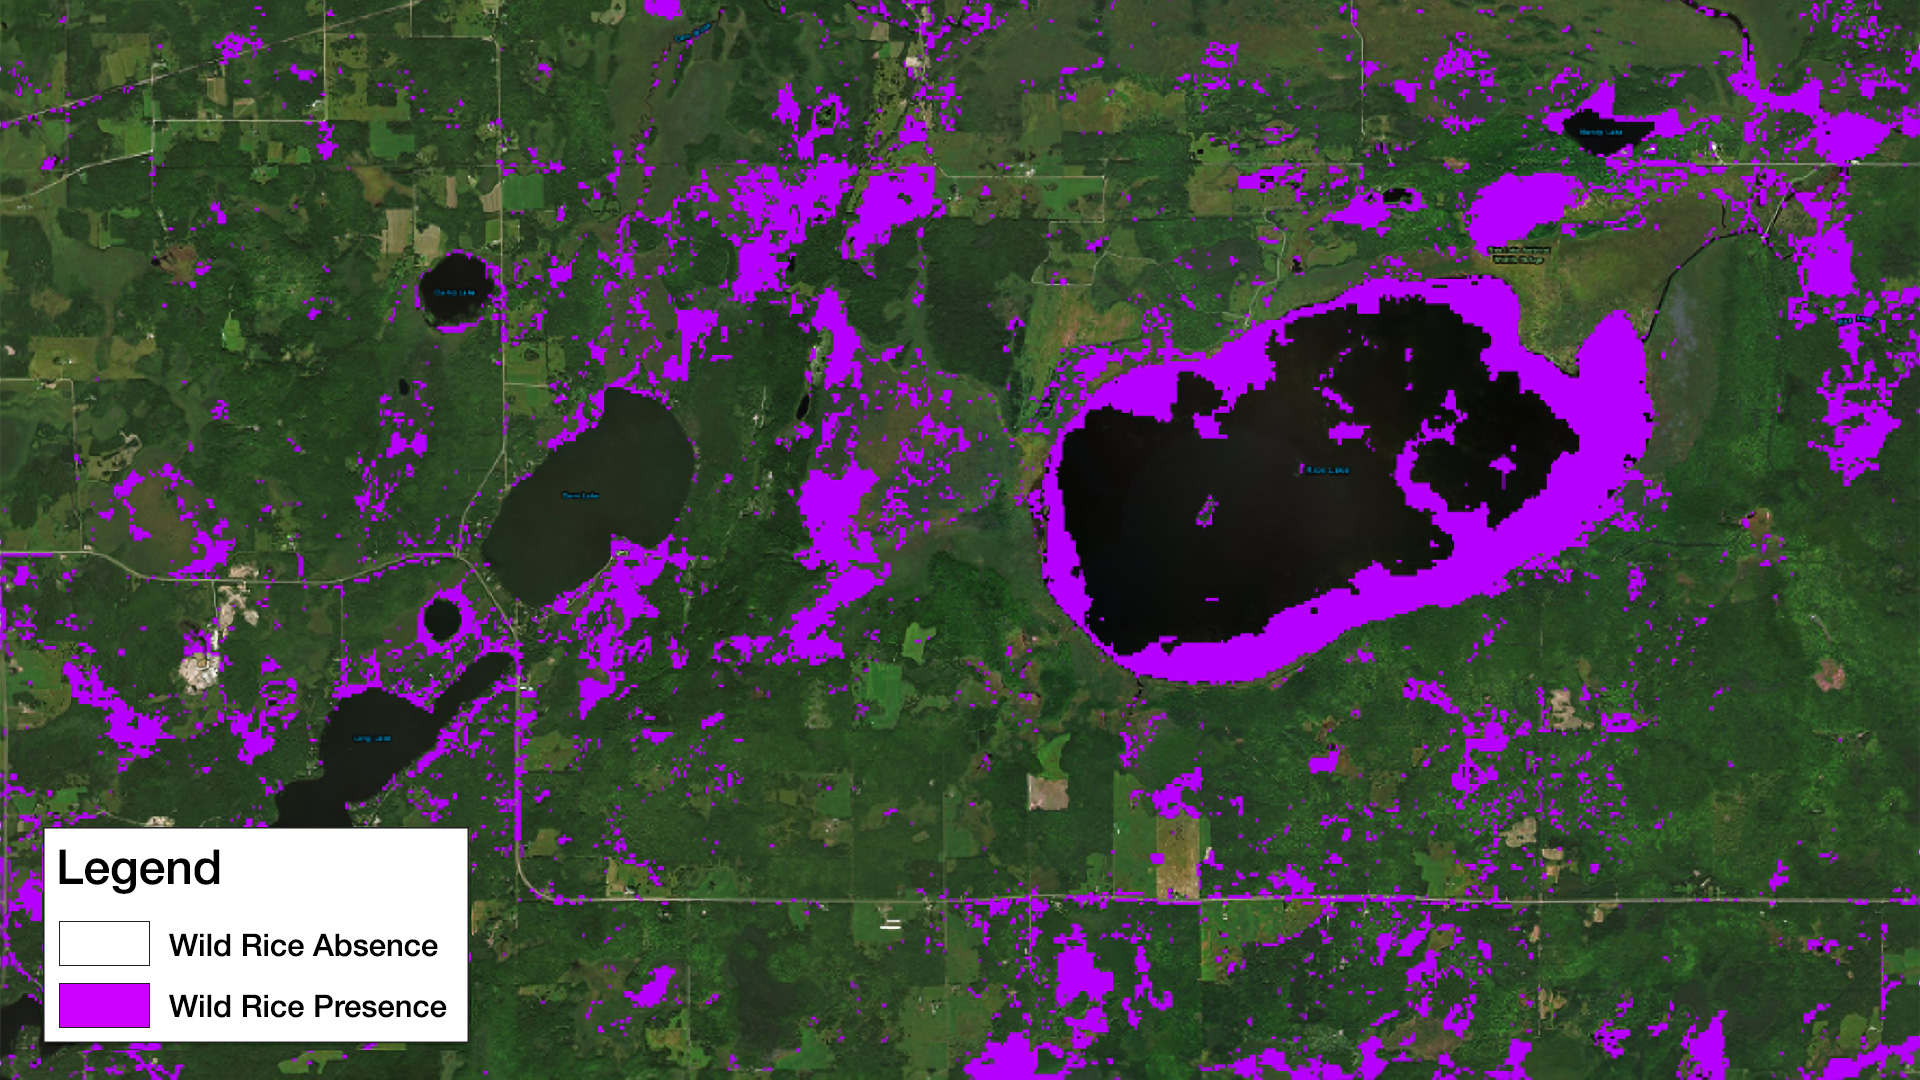 Map created by the Minnesota & Texas Agriculture & Food Security team depicting the presence or absence of wild rice. Image credit: NASA DEVELOP